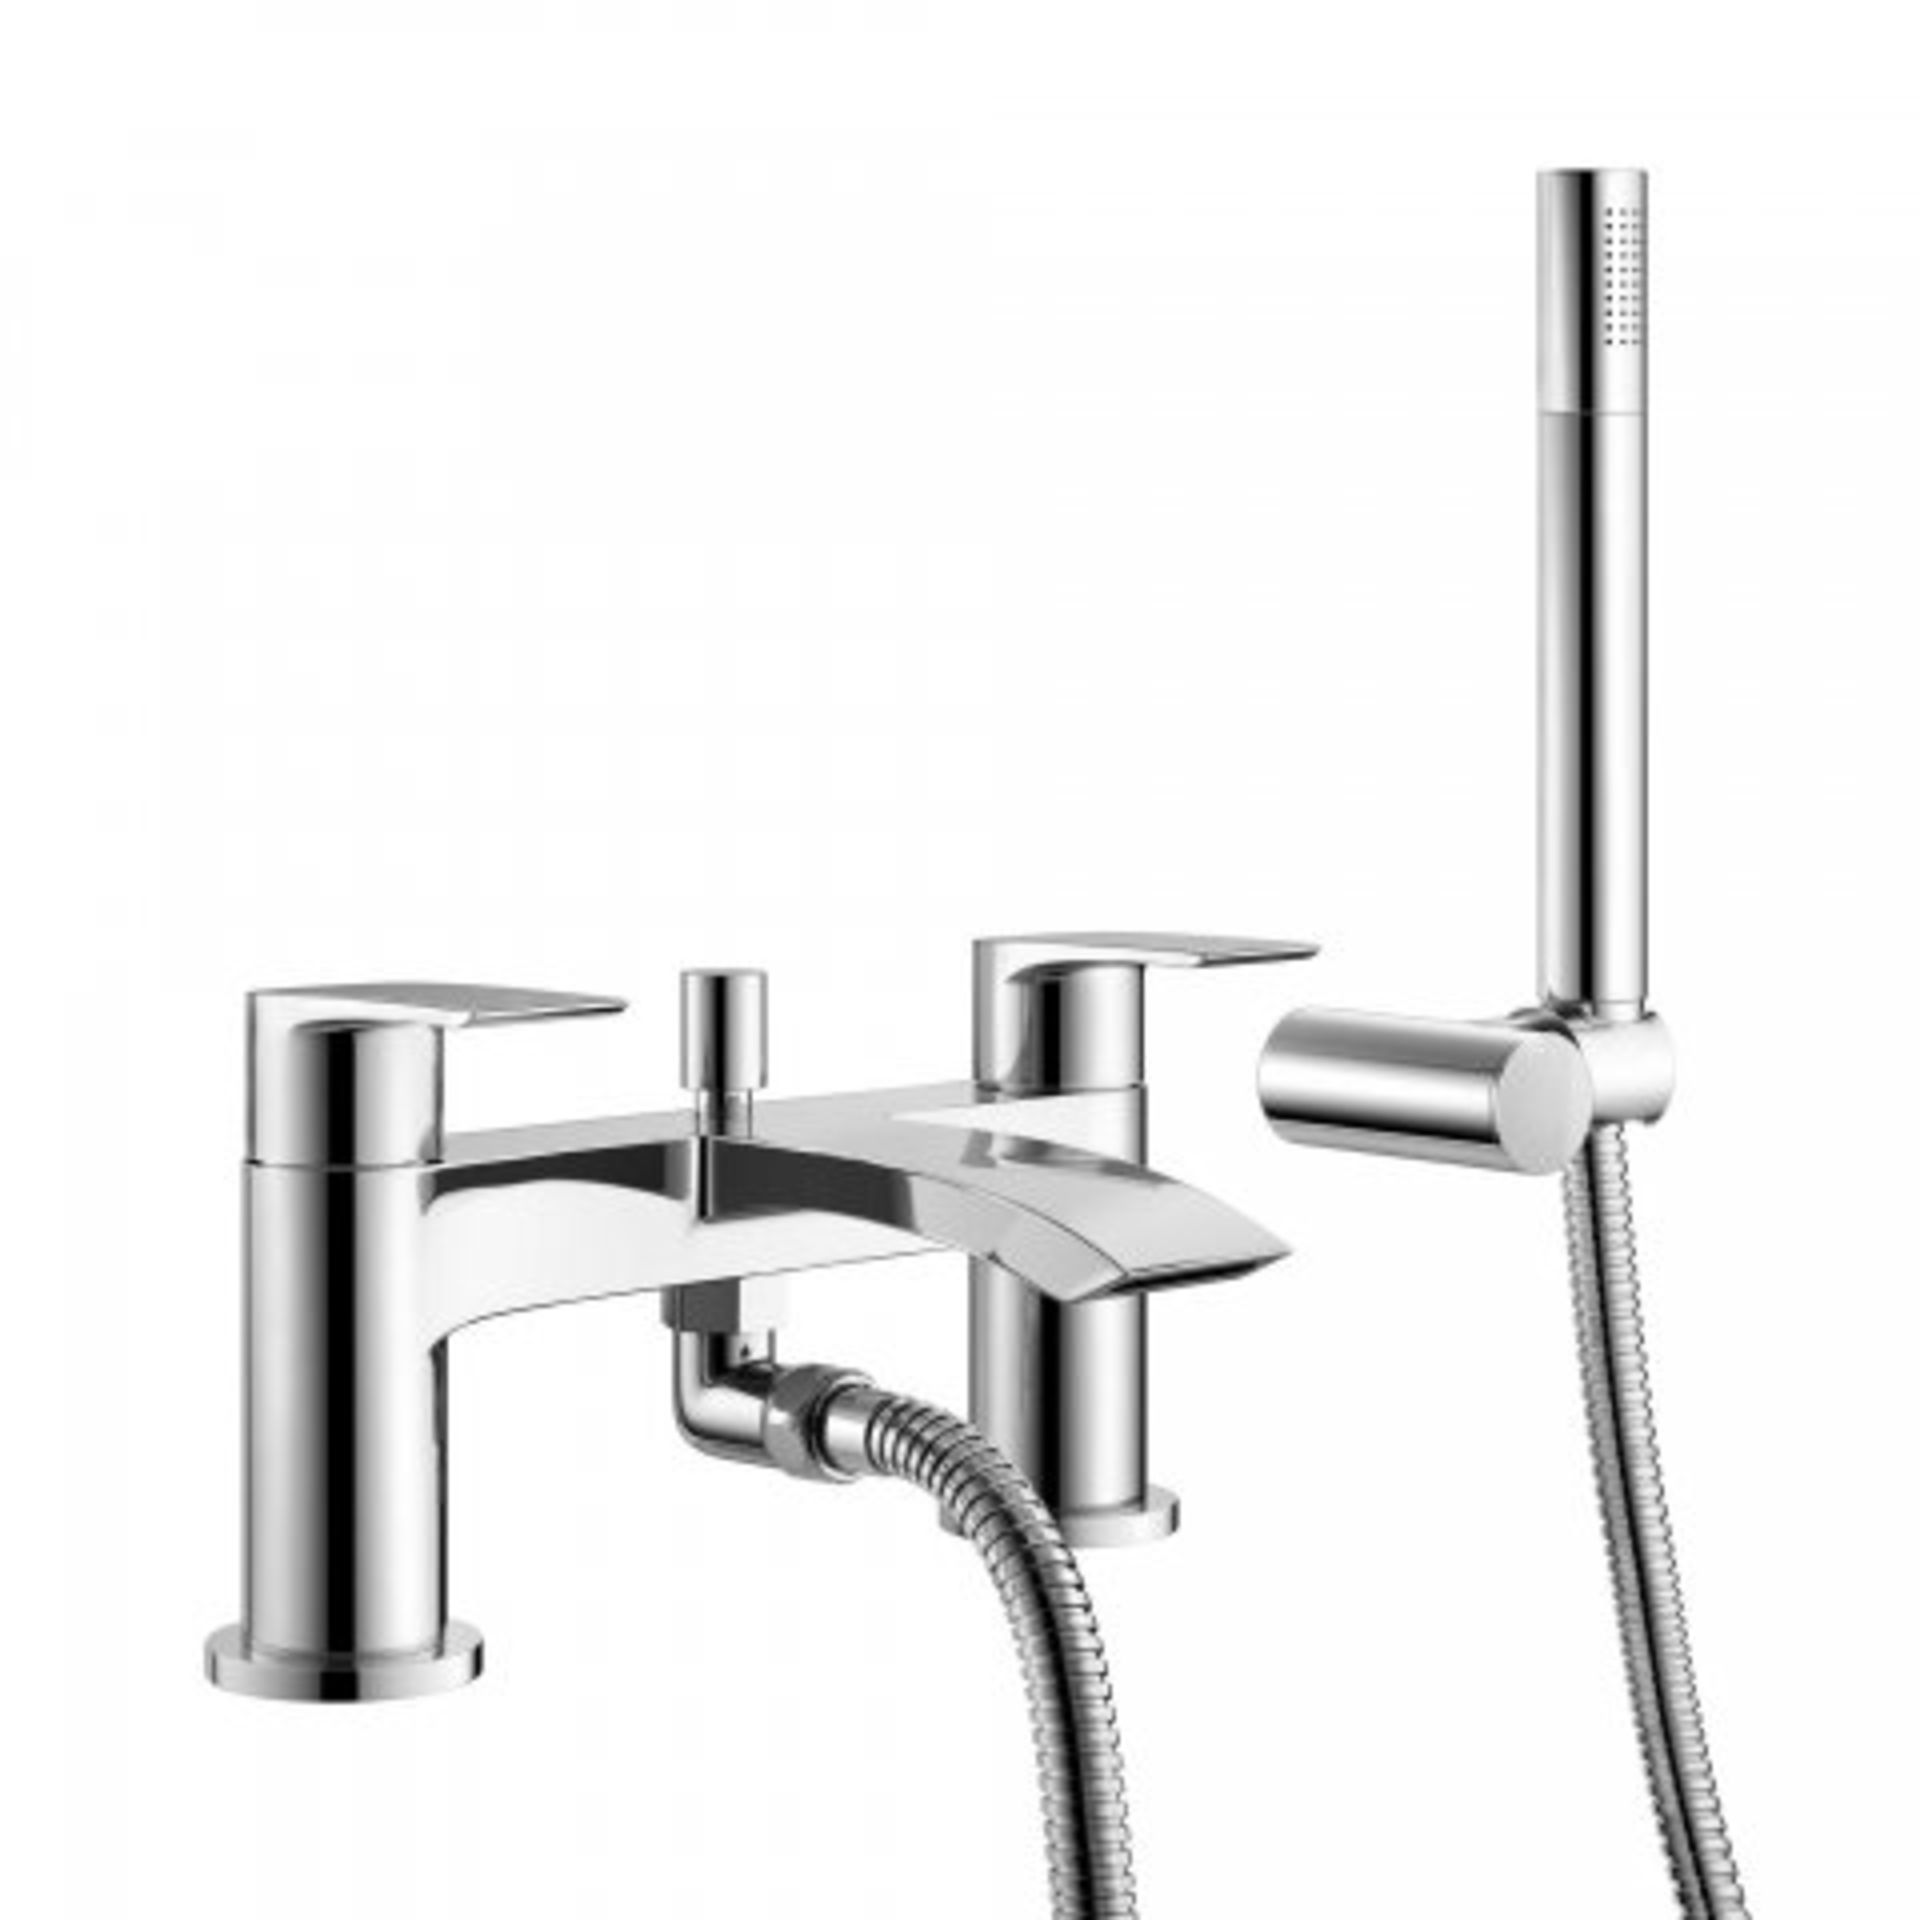 (I201) Avon Bath Shower Mixer Tap with Hand Held Shower Modern Bathroom Tap : Presenting a - Image 2 of 2